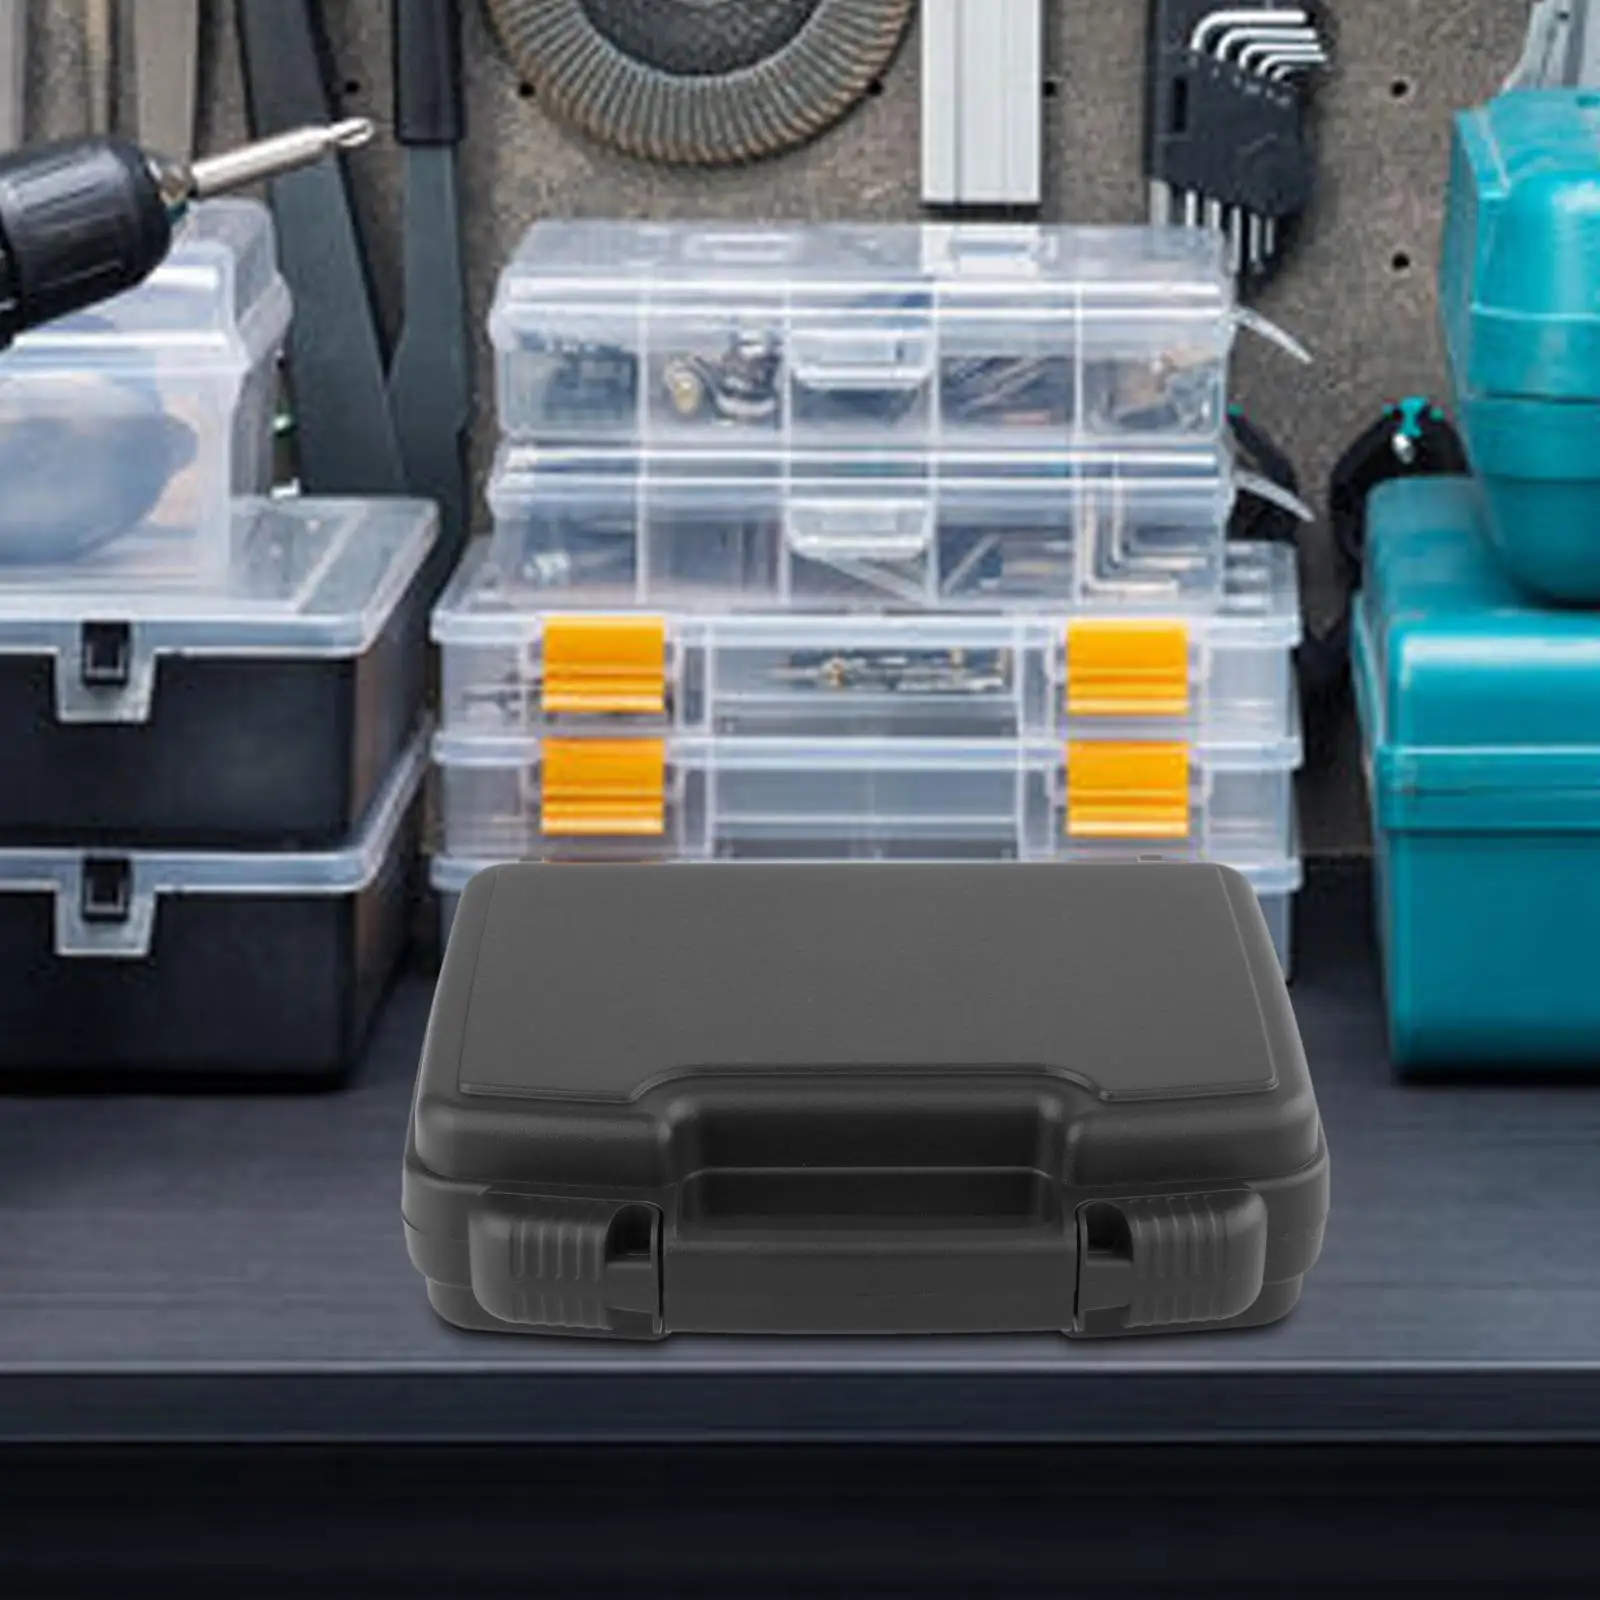 Multifunction Protect Toolbox DIY Compartment Watertight Anti Impact Lockable Empty Box for Screws Nails Nuts Craft